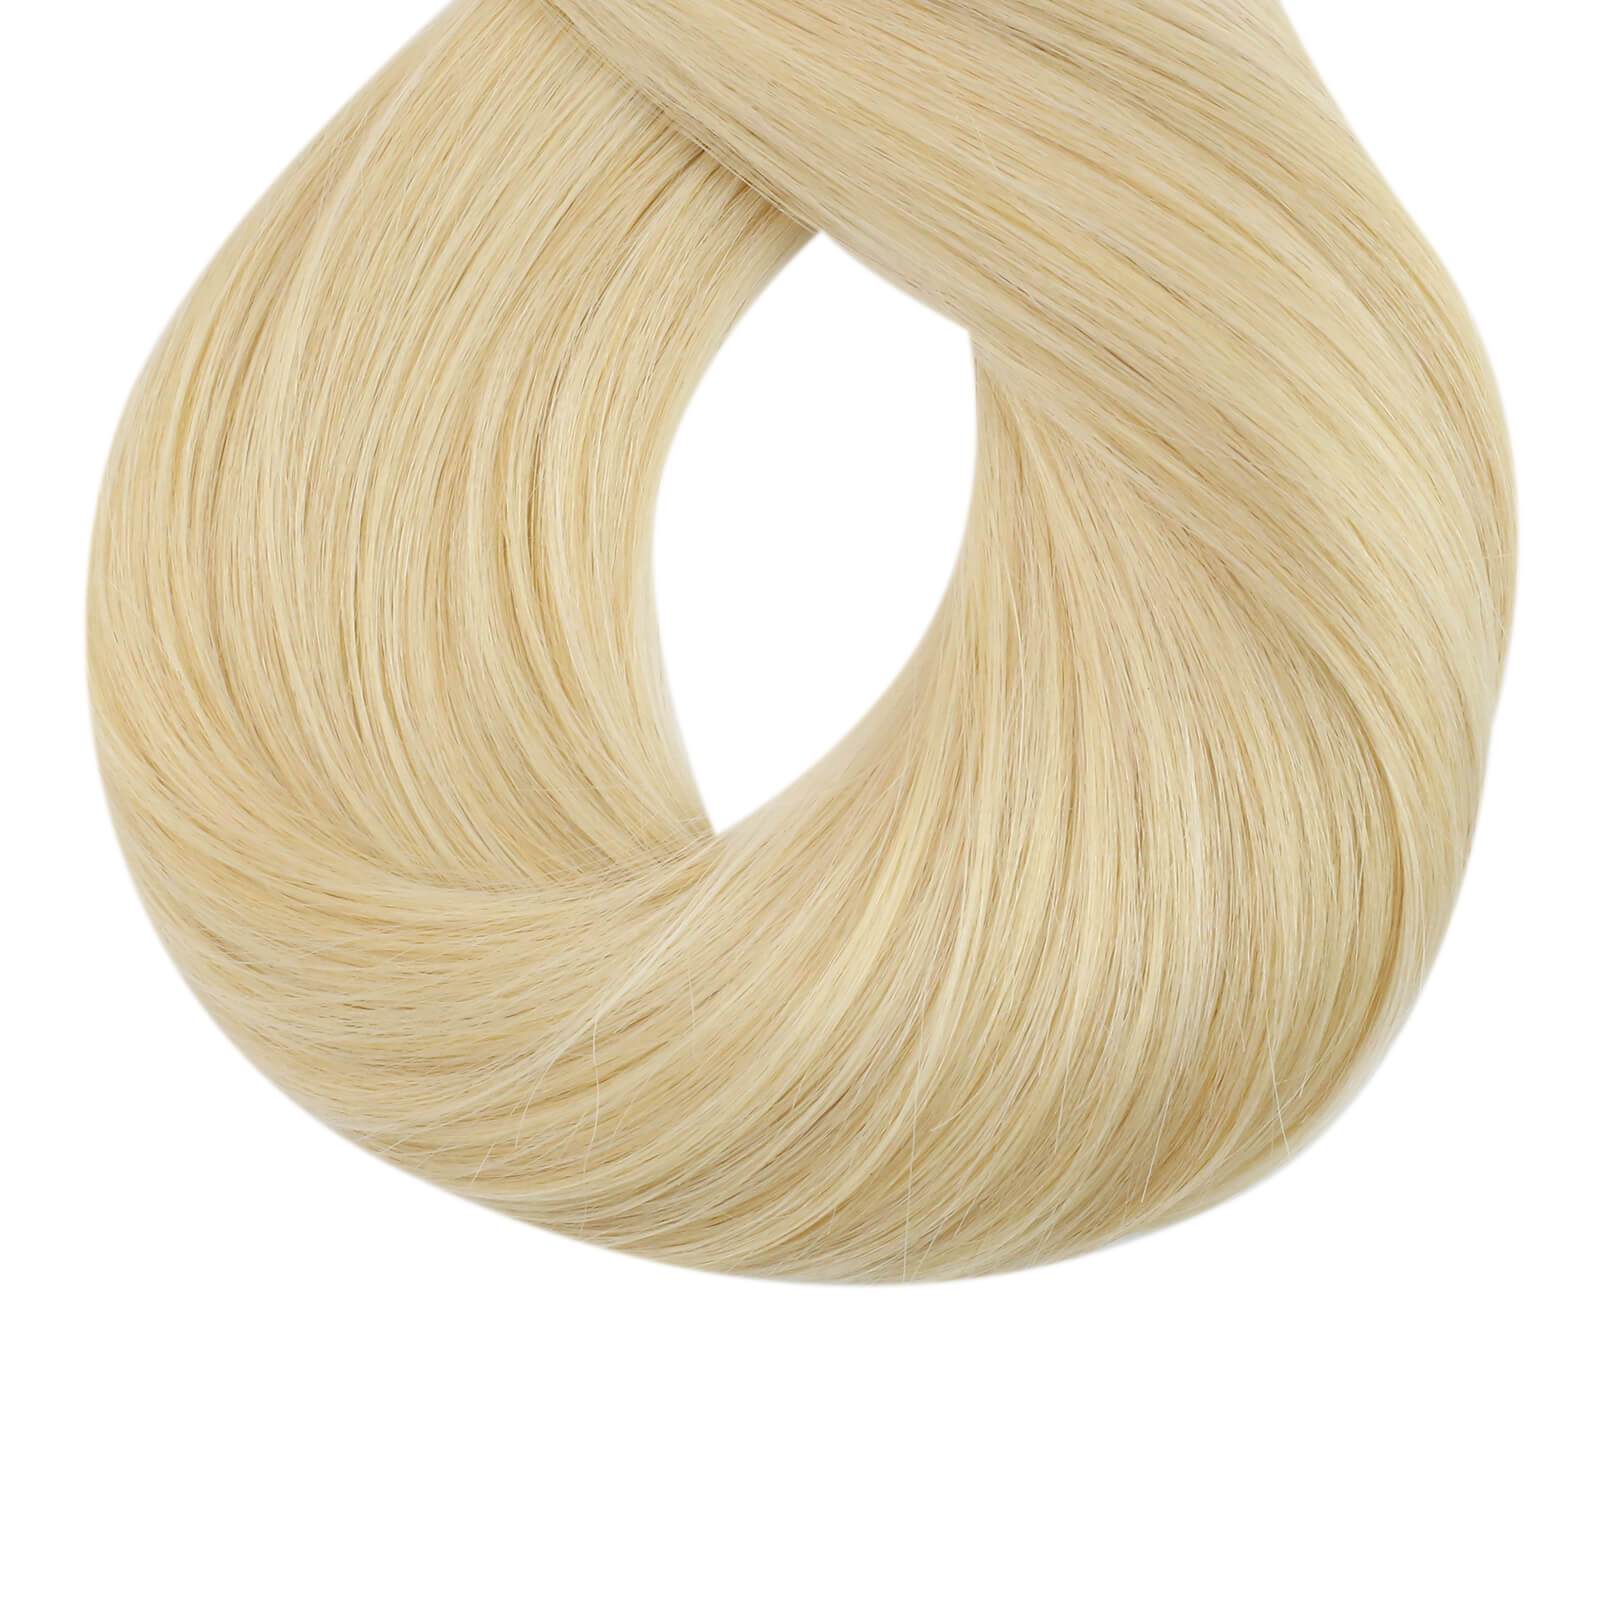 Human Hair Extensions Tape in Real Natural Hair 613